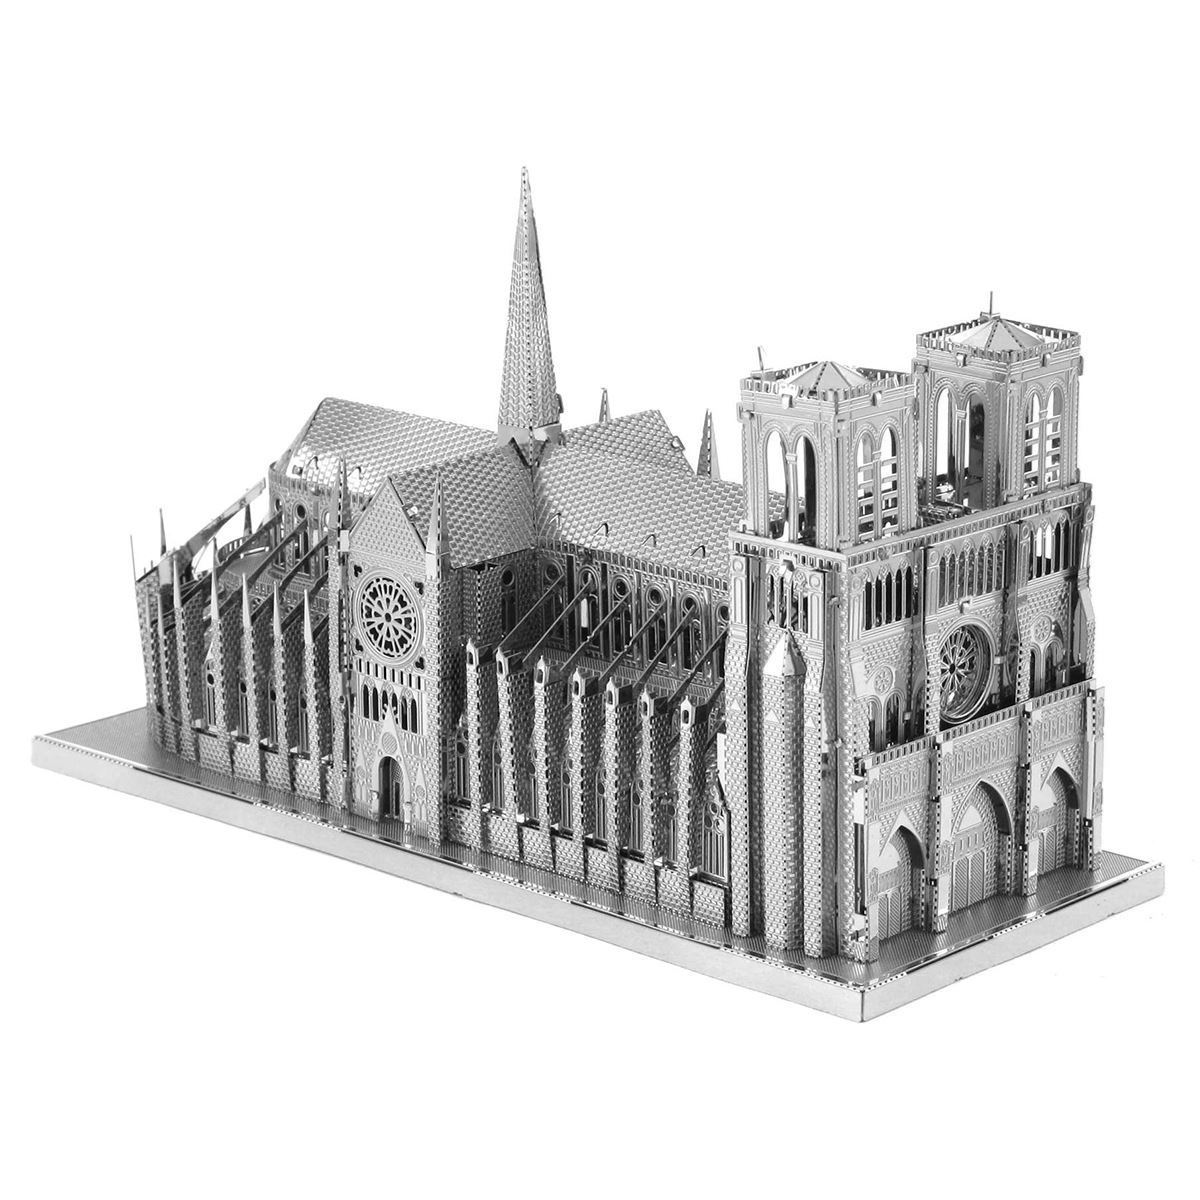 Fascinations Metal Earth Notre-Dame Cathedral ICONX Laser Cut 3D Model 